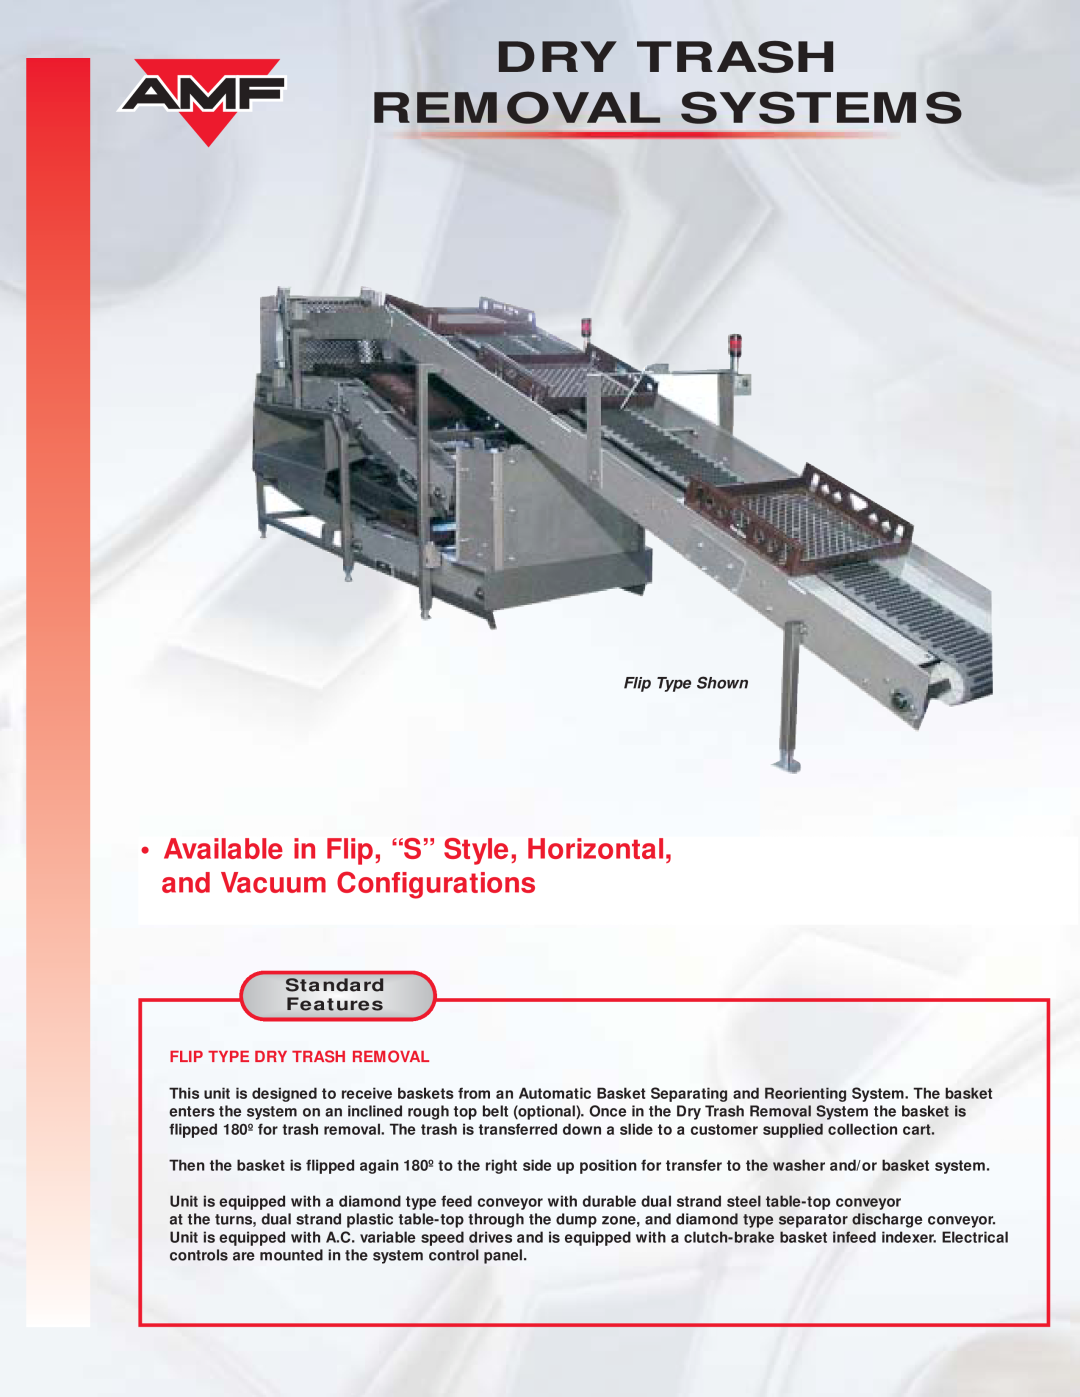 AMF Dry Trash Removal Systems manual Standard, Features, Flip Type Dry Trash Removal, Flip Type Shown 